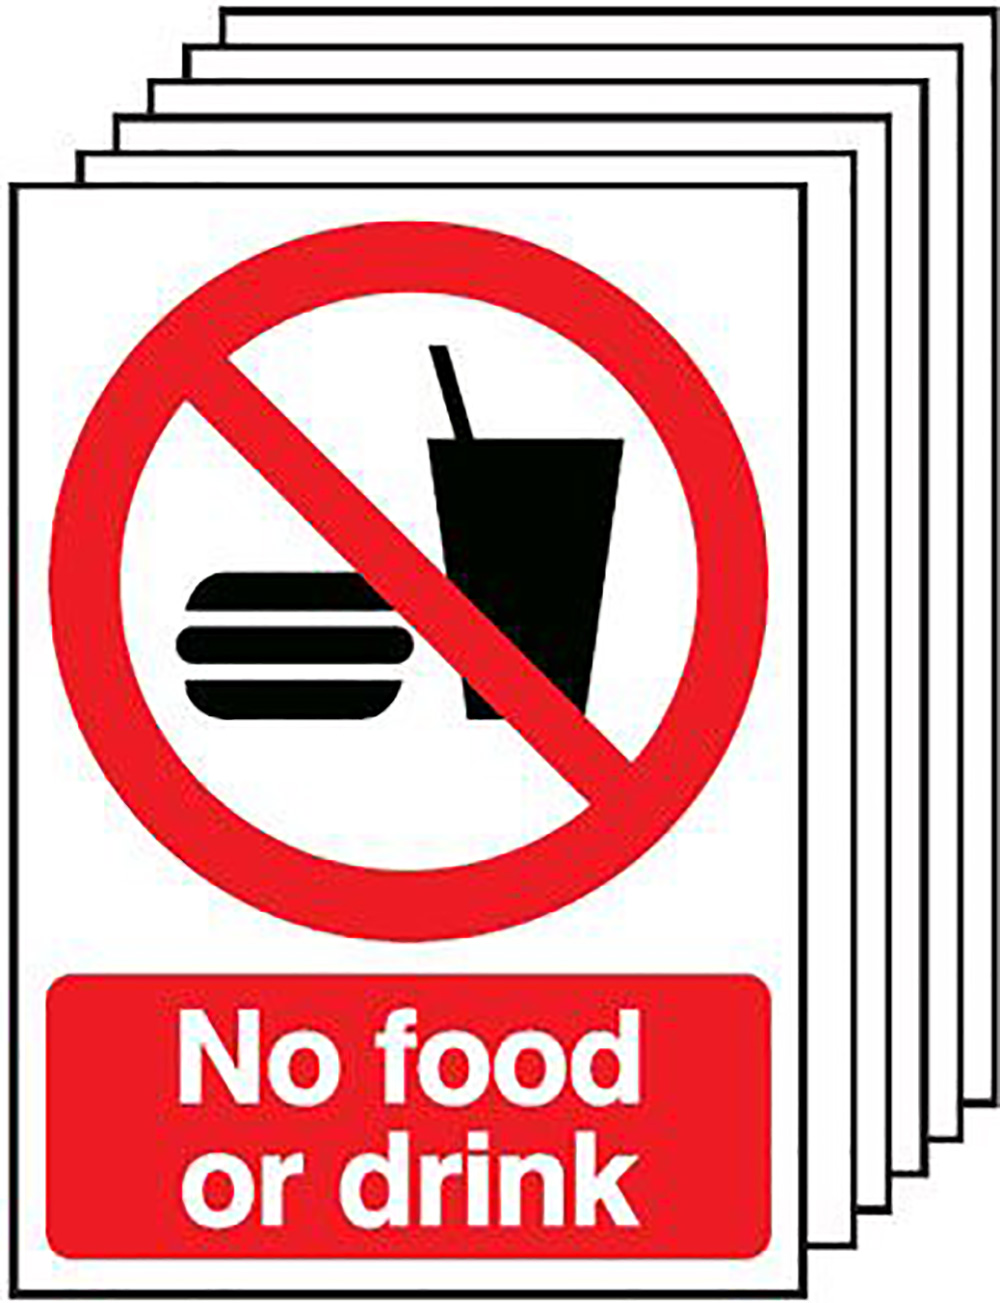 No Food or Drink   420x297mm 1.2mm Rigid Plastic Safety Sign Pack of 6 